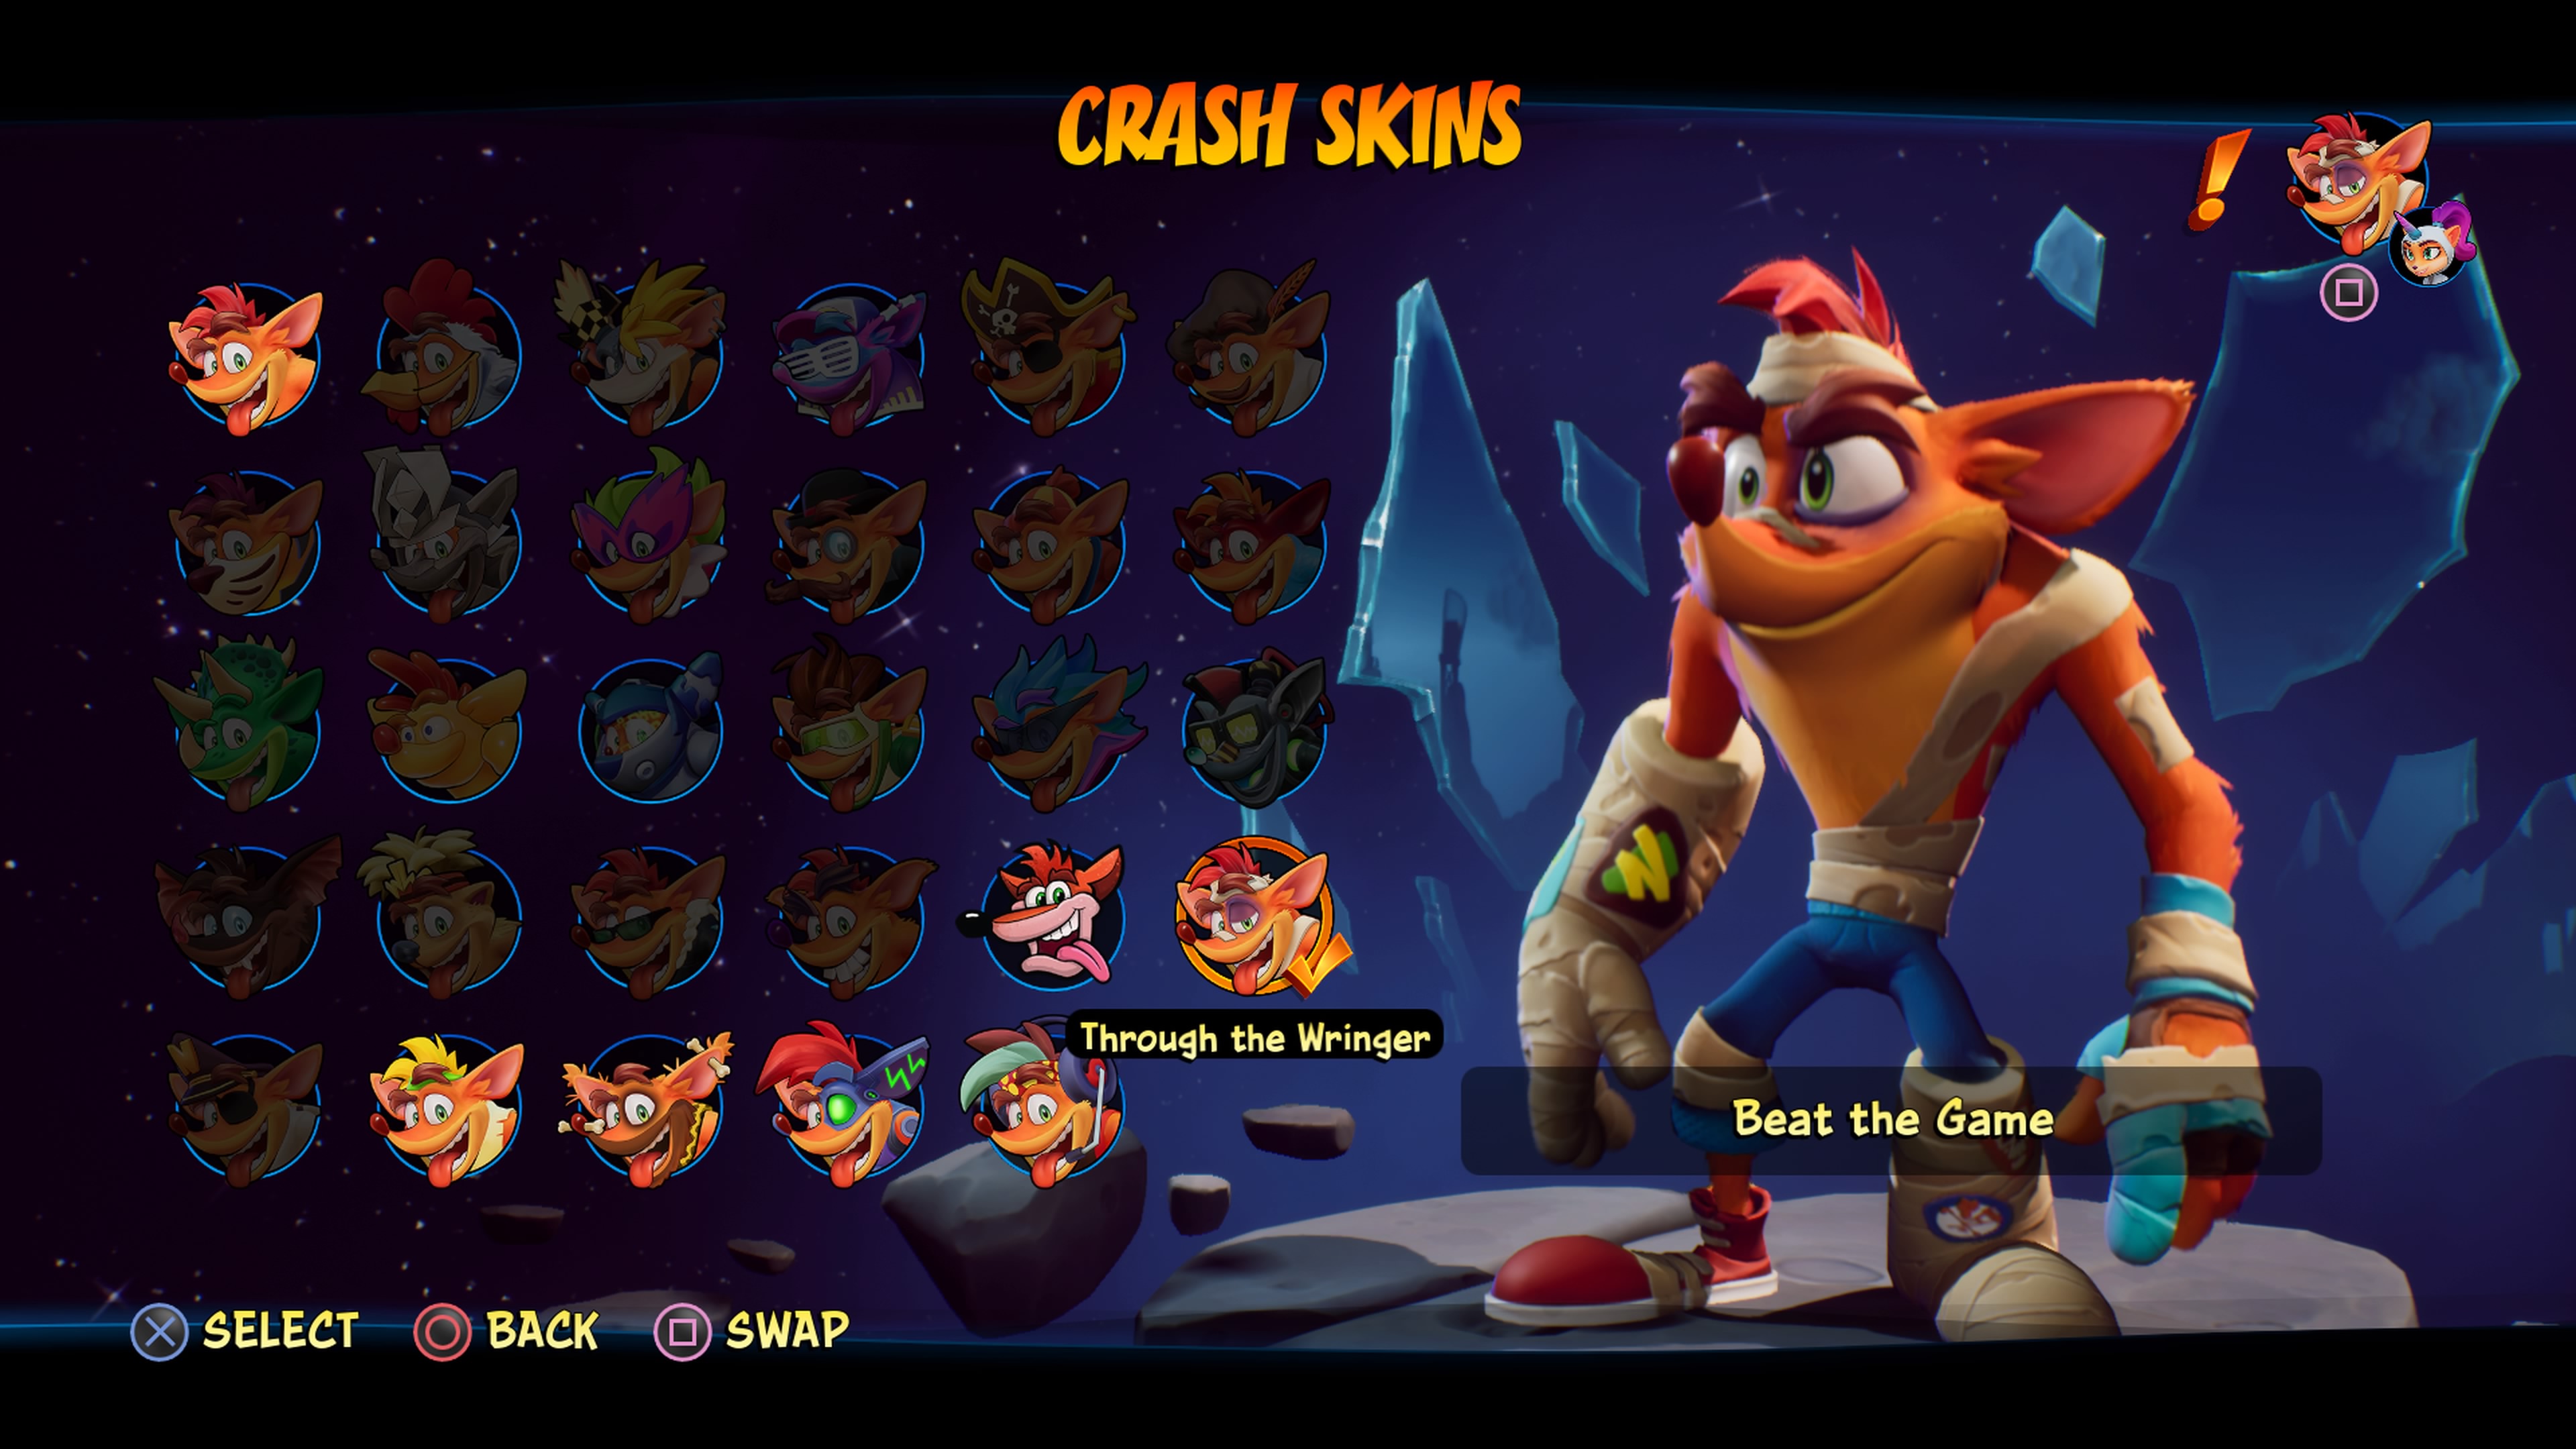 An ode to the Crash Bandicoot 4 level where I died 258 times